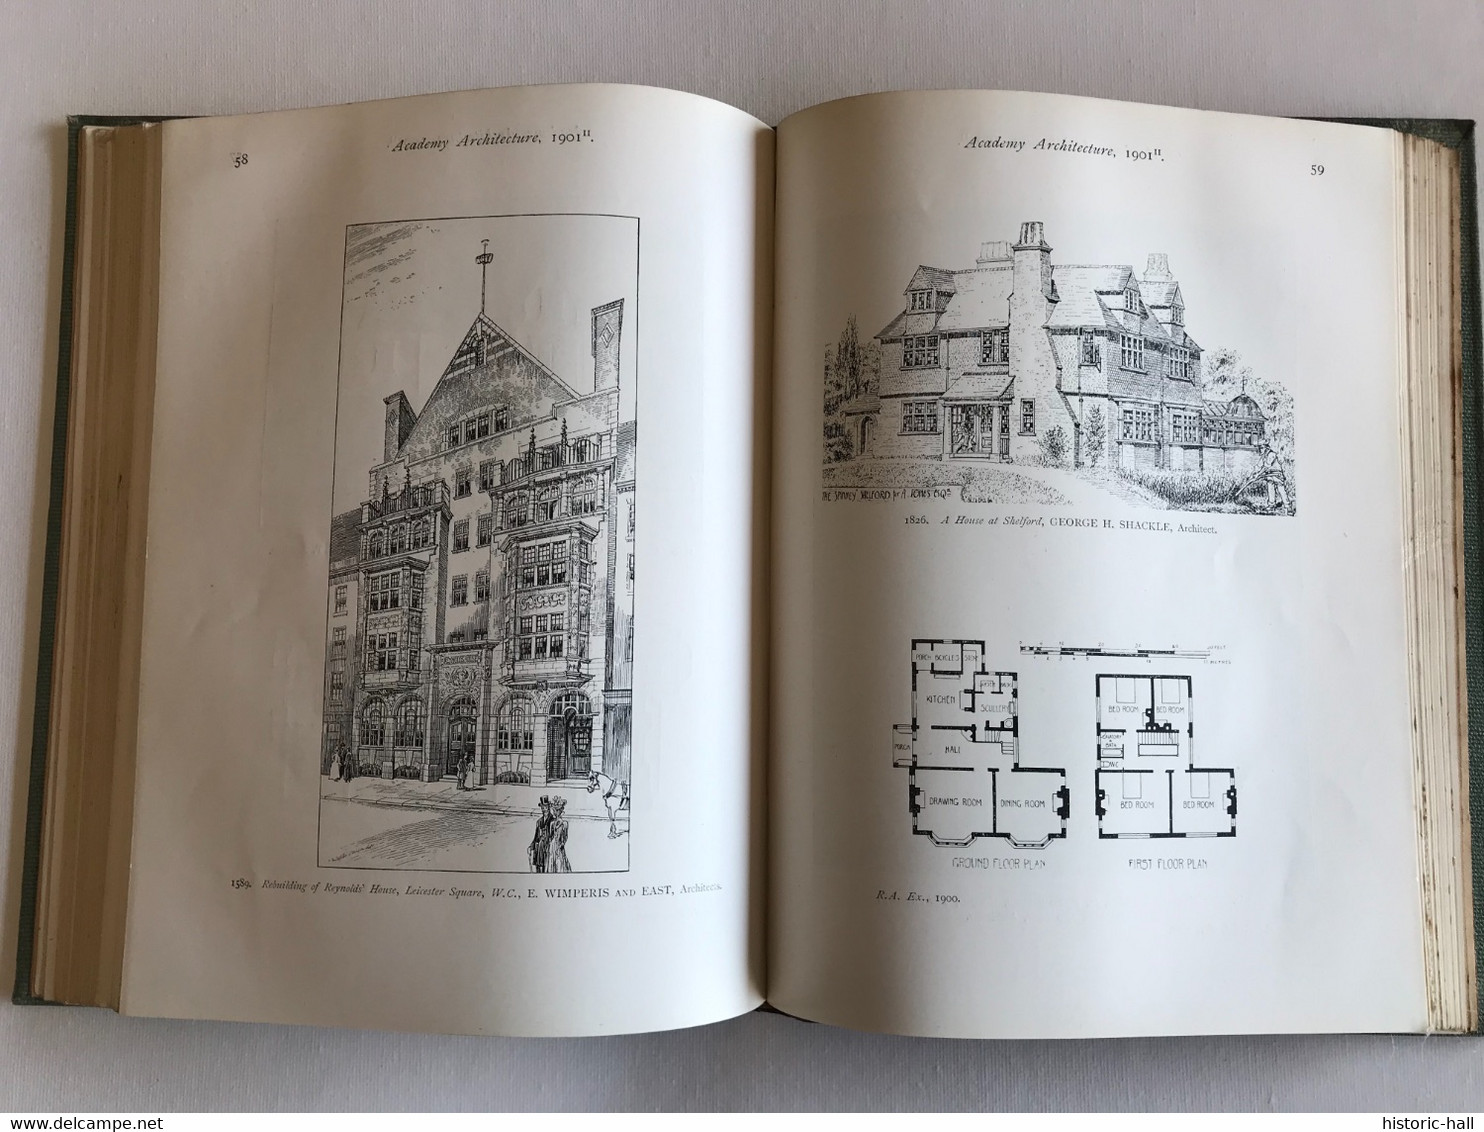 ACADEMY ARCHITECTURE & Architectural Review - vol I & II - 1901 - Alexander KOCH